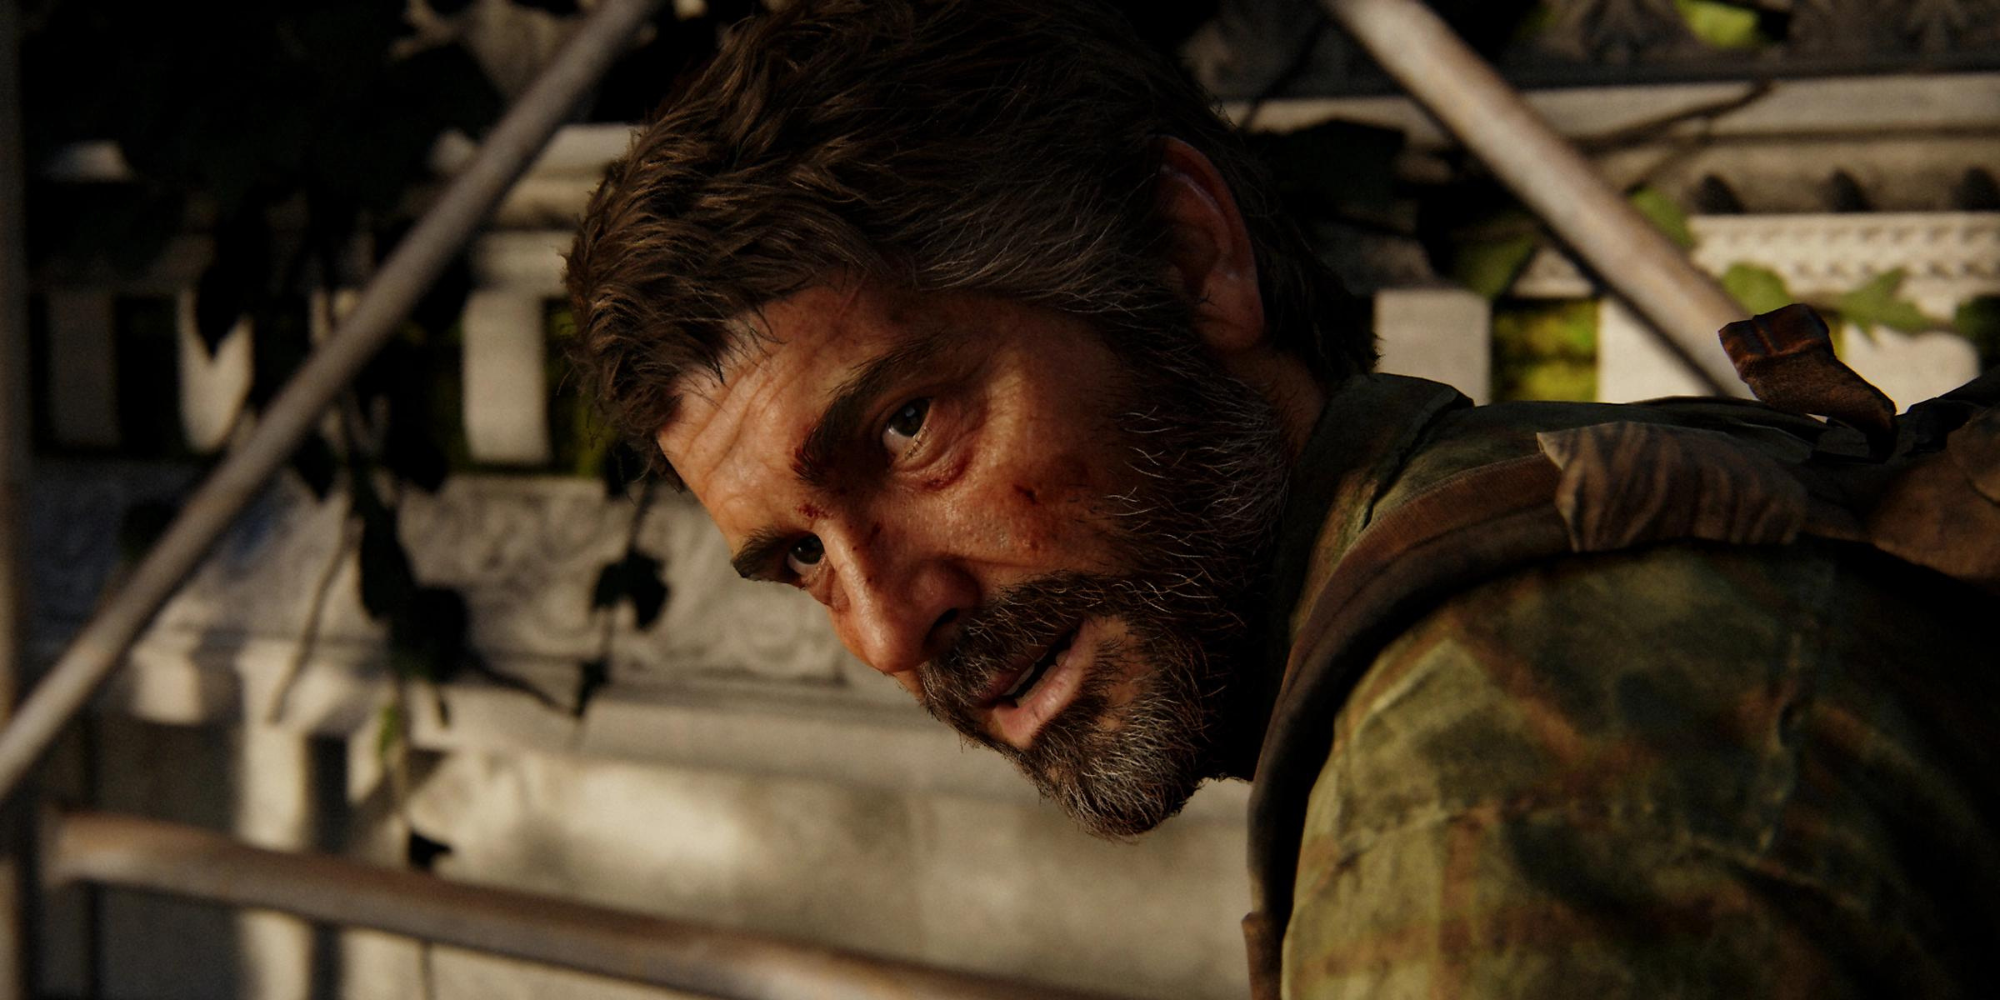 Antihero with a Heart: Analyzing Joel from 'The Last of Us' - ScreenCraft